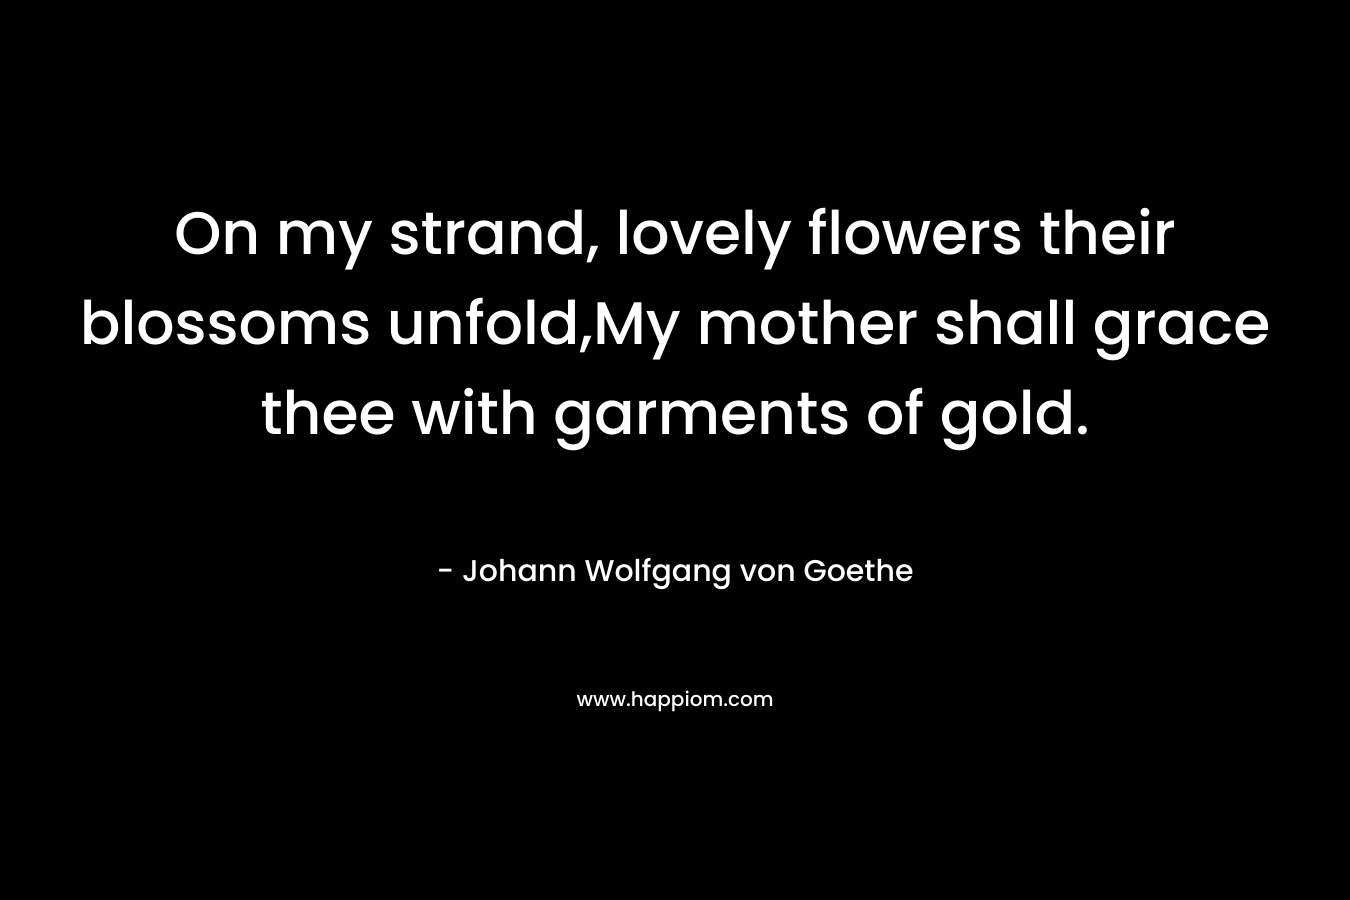 On my strand, lovely flowers their blossoms unfold,My mother shall grace thee with garments of gold.